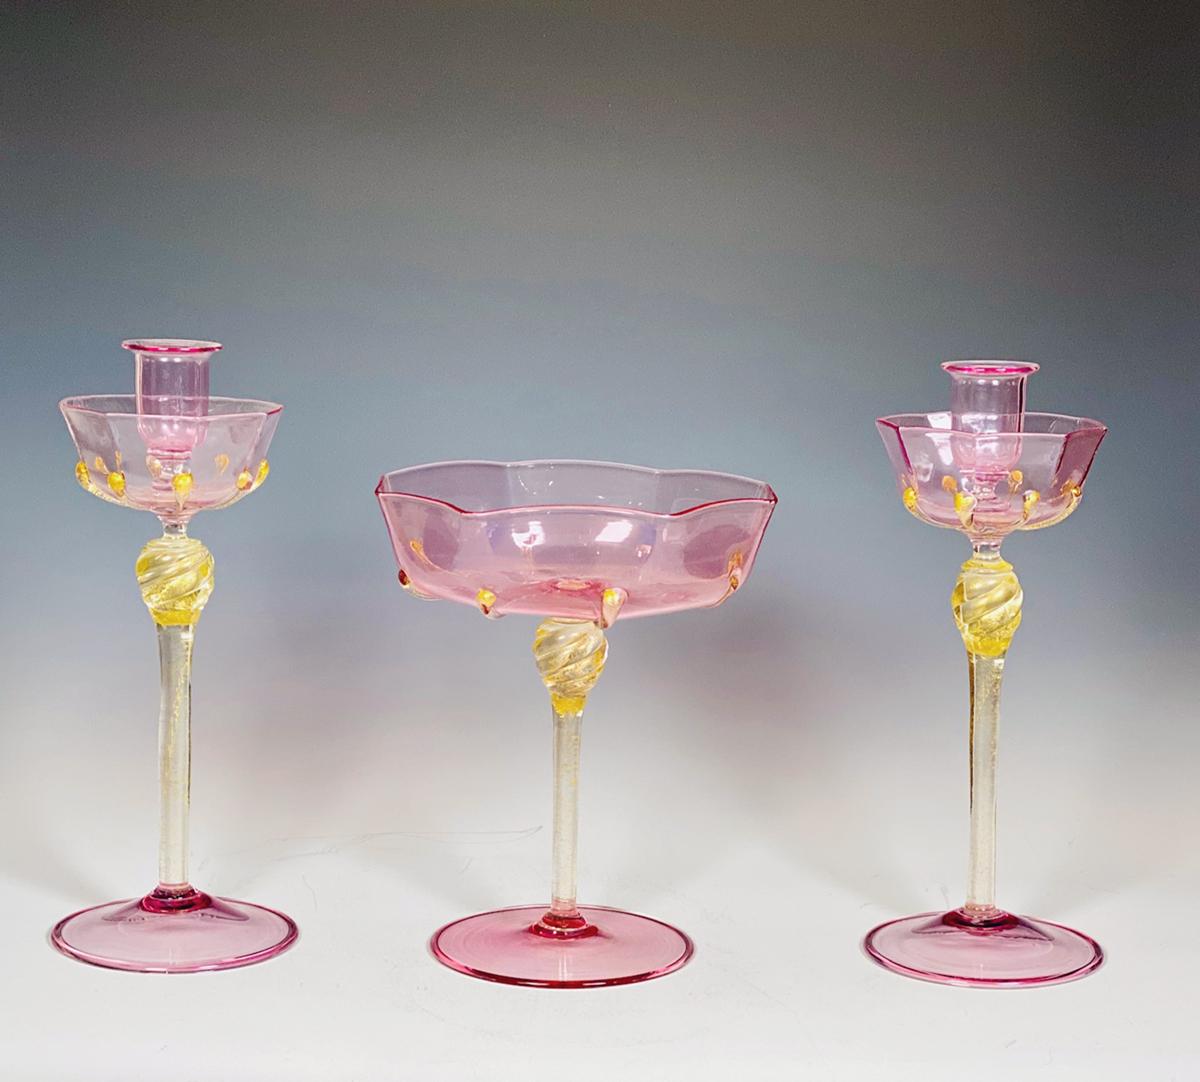 Salviati Venetian Complete Table Service for 12 Handblown Pink and Gold Goblets 7